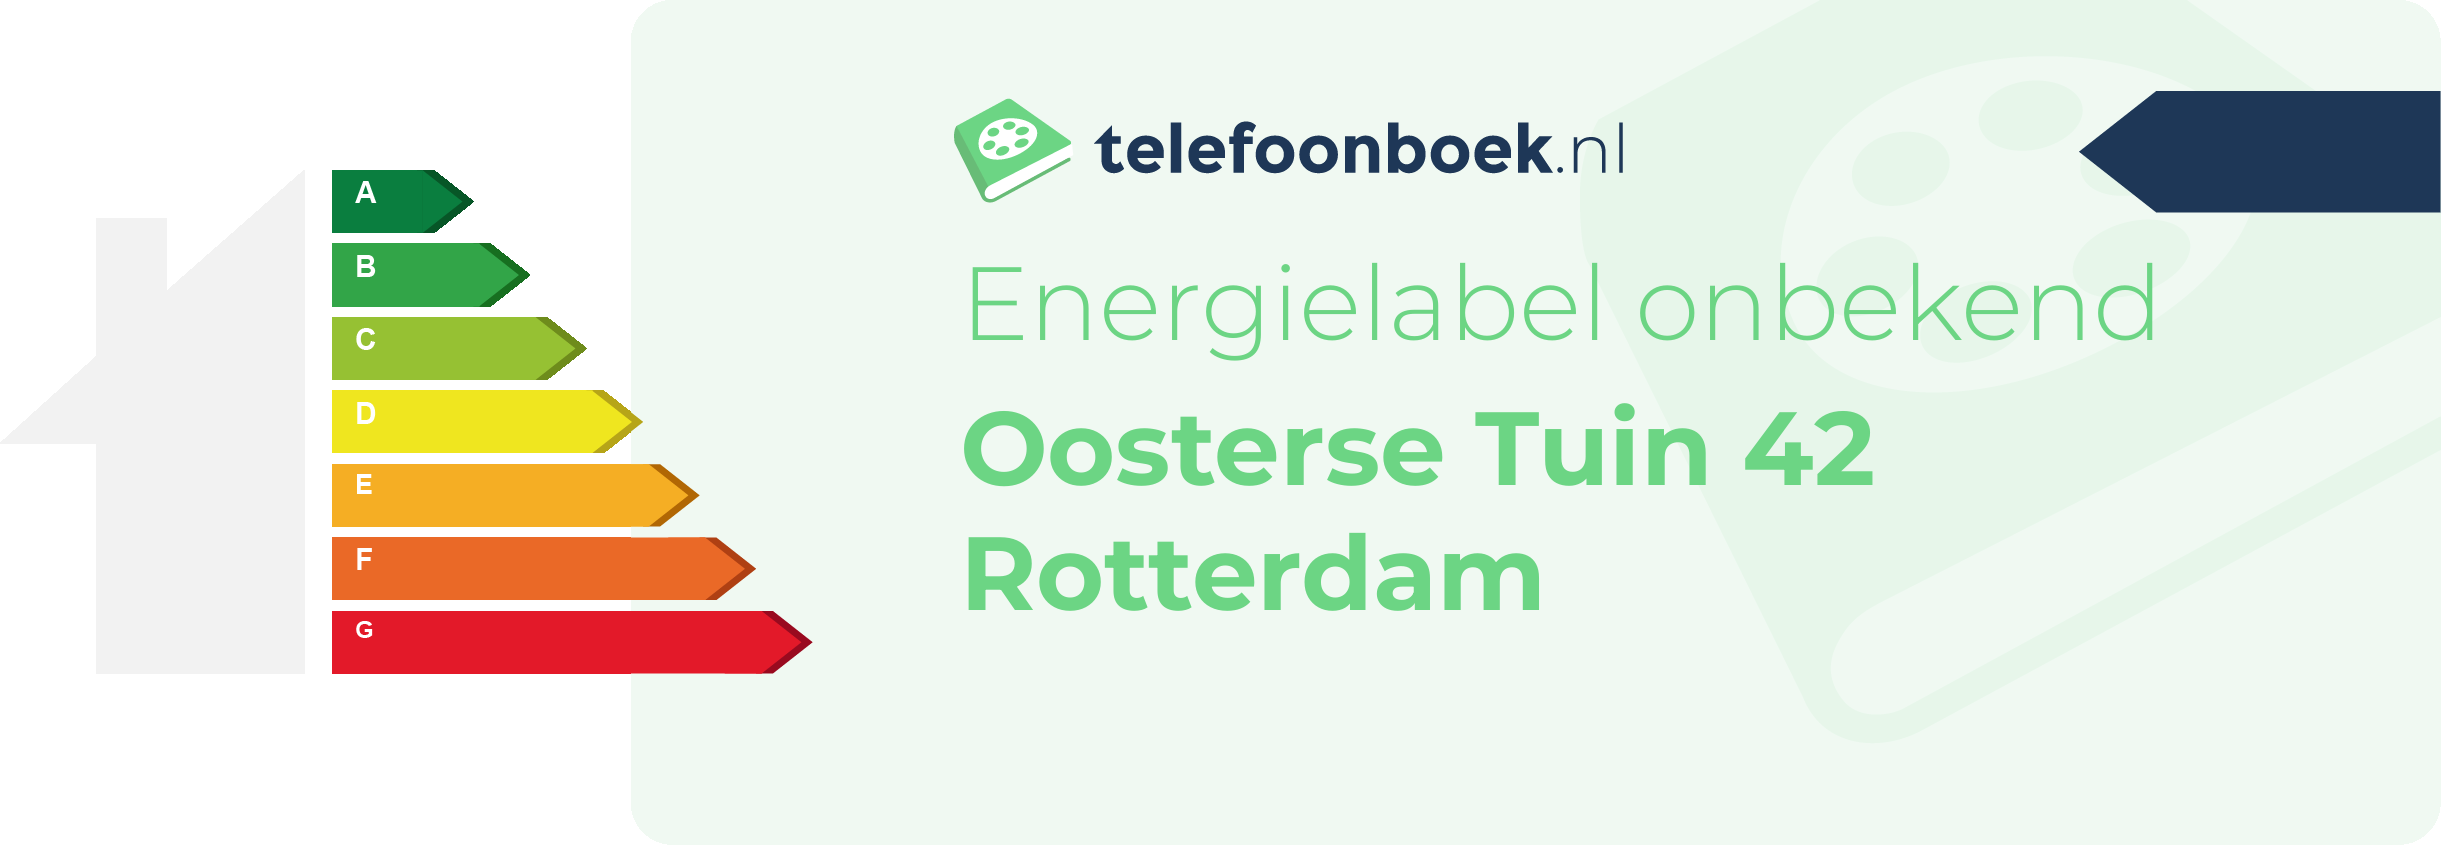 Energielabel Oosterse Tuin 42 Rotterdam